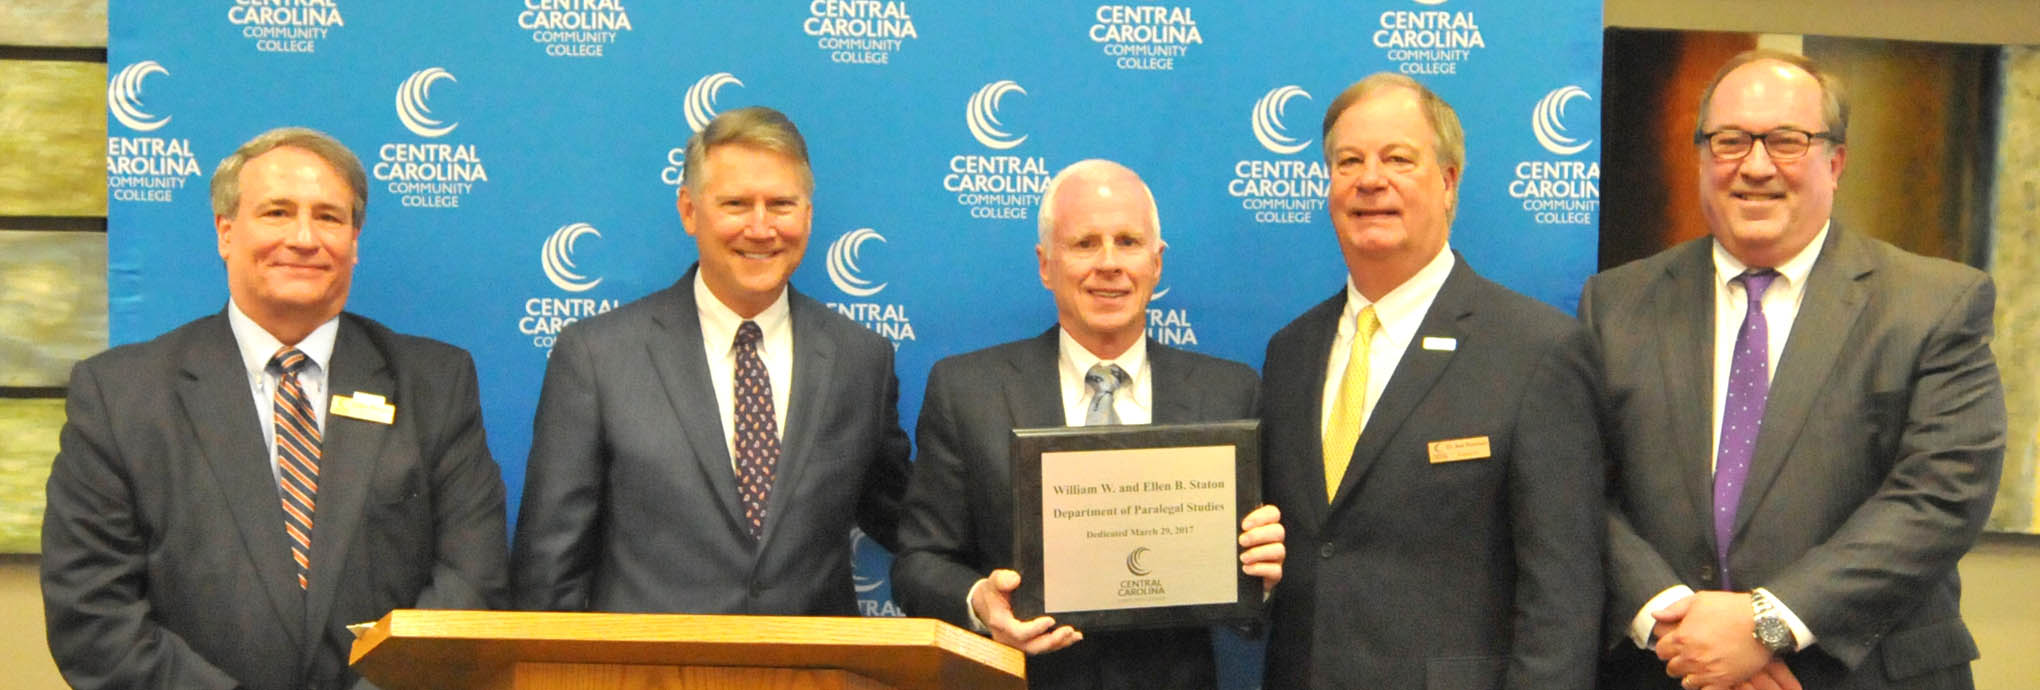 Click to enlarge,  Central Carolina Community College's Department of Paralegal Studies has been dedicated in honor of the late William W. and Ellen B. Staton of Sanford. Pictured at the dedication ceremony were CCCC Board of Trustees Chairman Julian Philpott; former N.C. Lt. Gov. Dennis Wicker; Wayne Staton, son of William W. and Ellen B. Staton; CCCC President Dr. T. Eston Marchant; and CCCC Trustee Norman "Chip" Post Jr. 